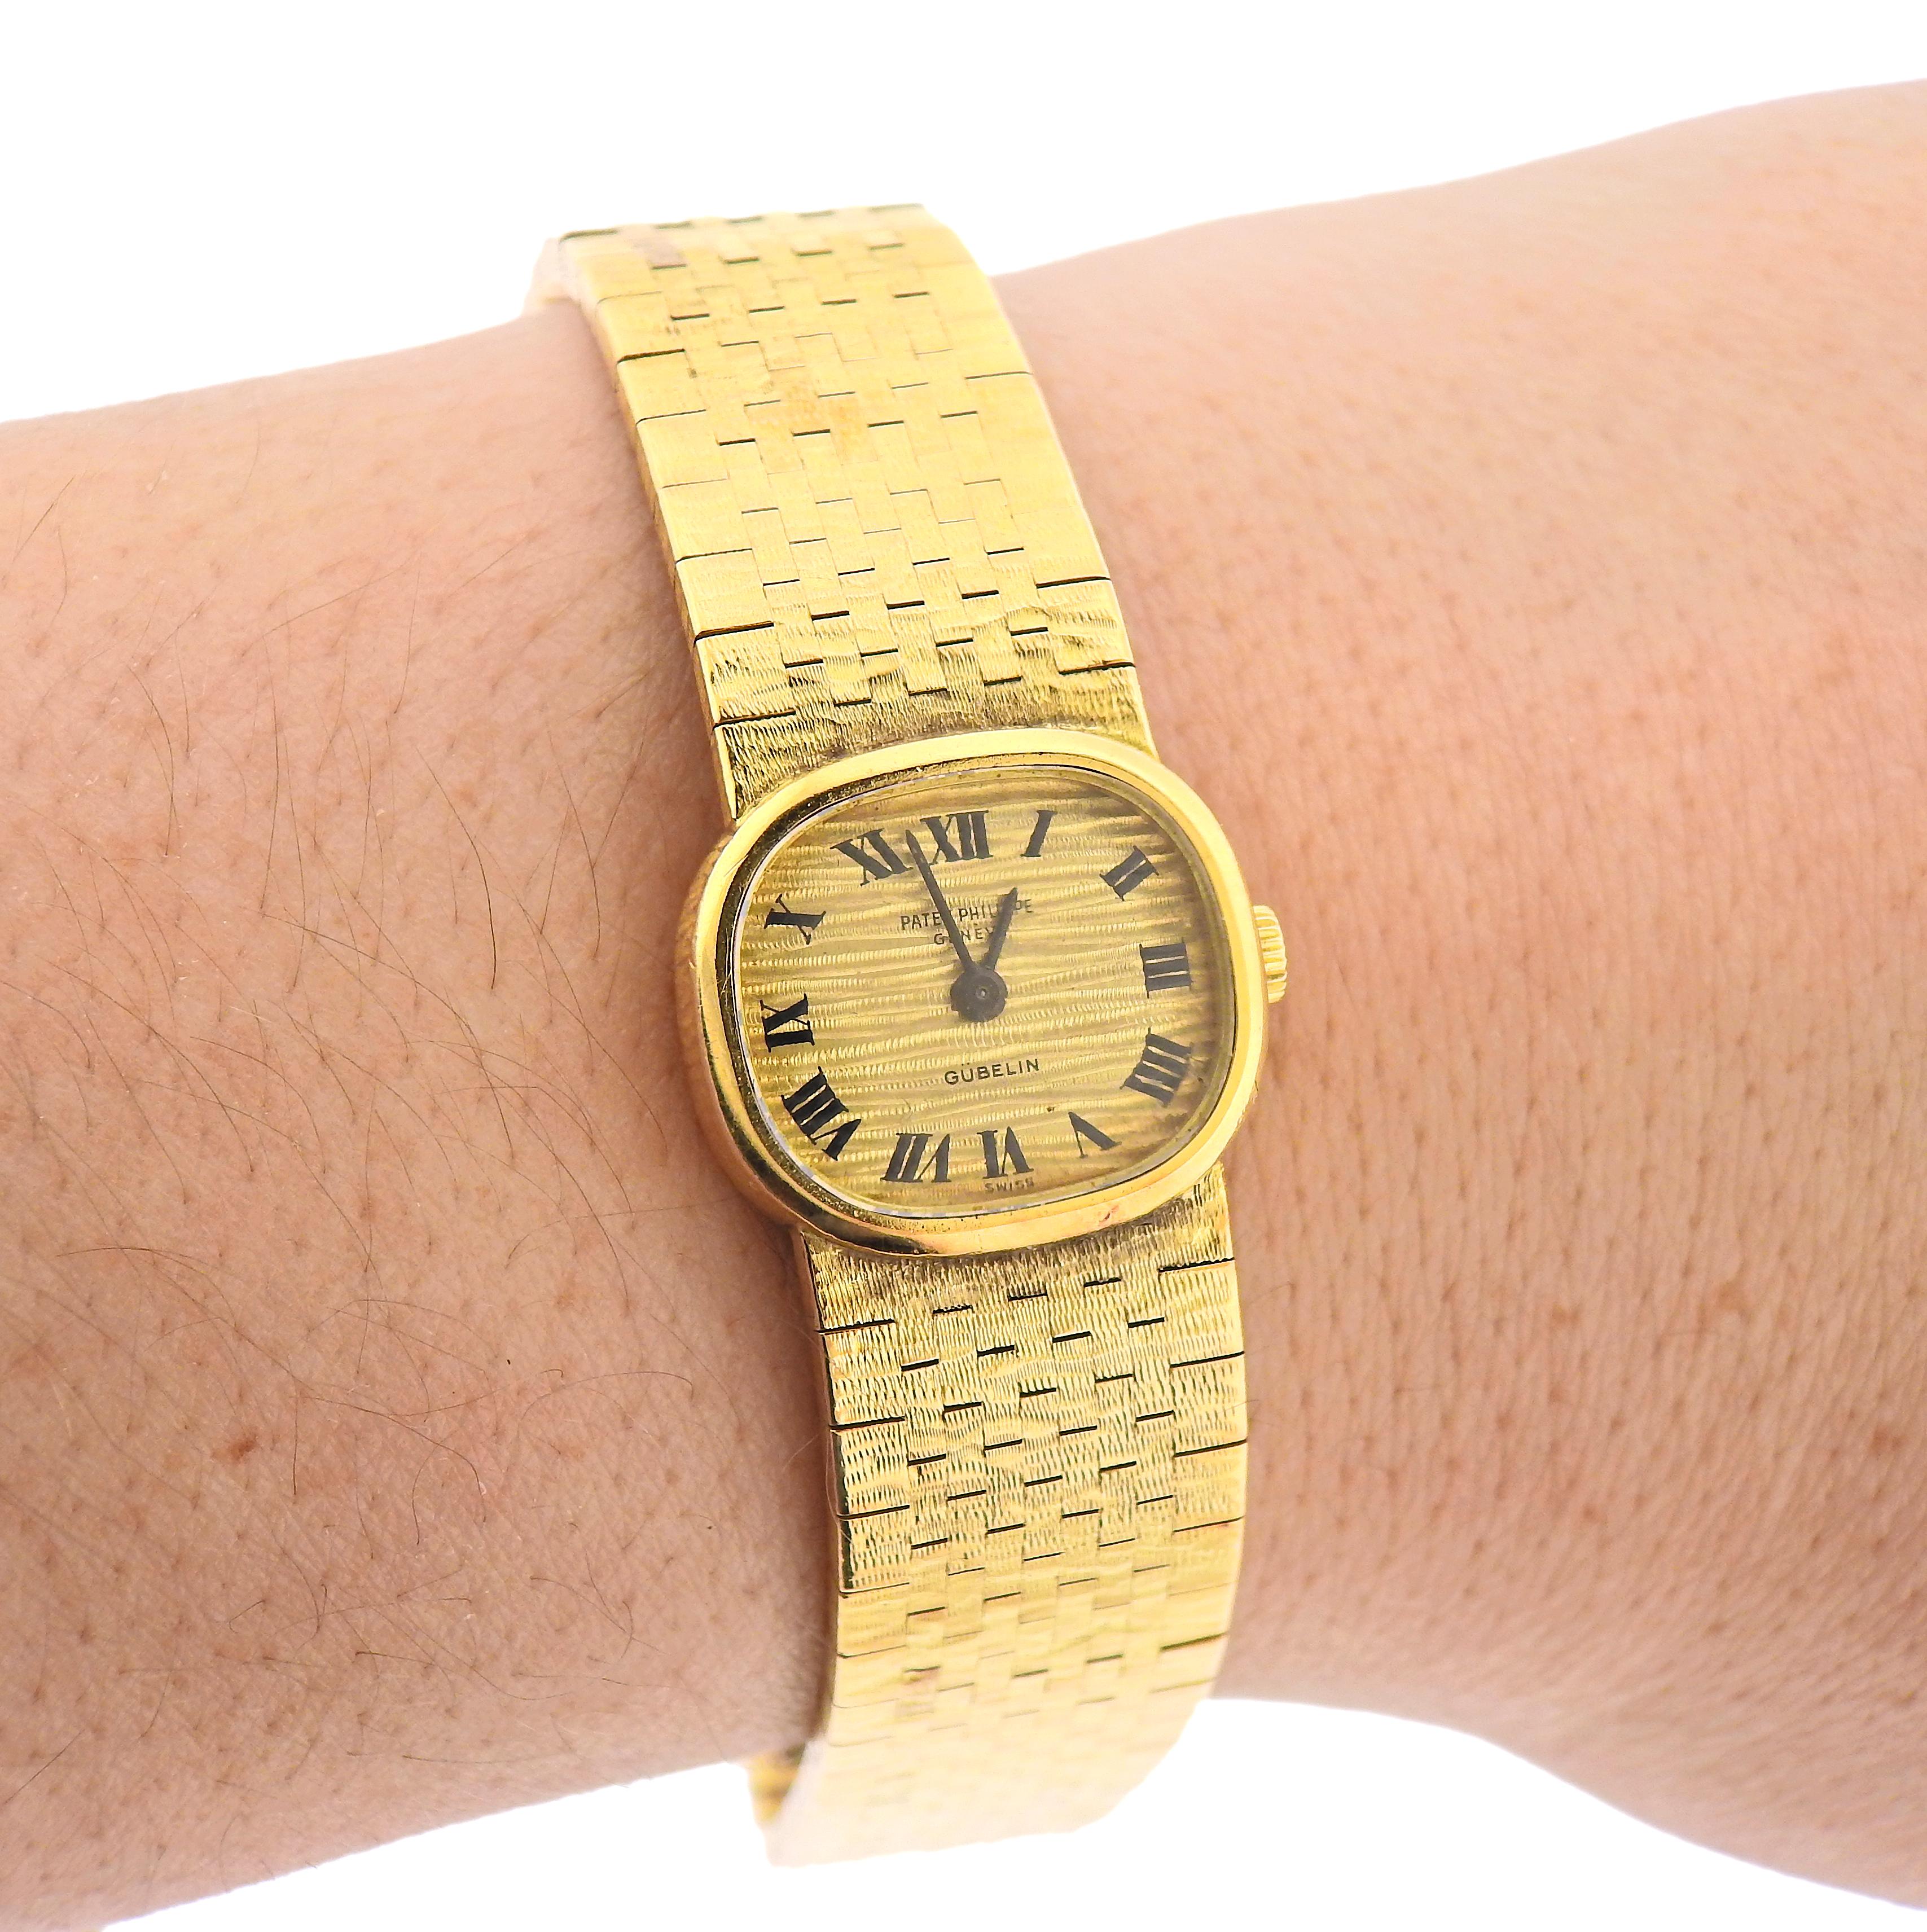 Vintage 18k gold Patek Philippe for Gubelin lady's watch. Case measures 20mm x 18mm, with gold ribbed dial, signed by Patek Philippe and Gubelin. Bracelet is 6